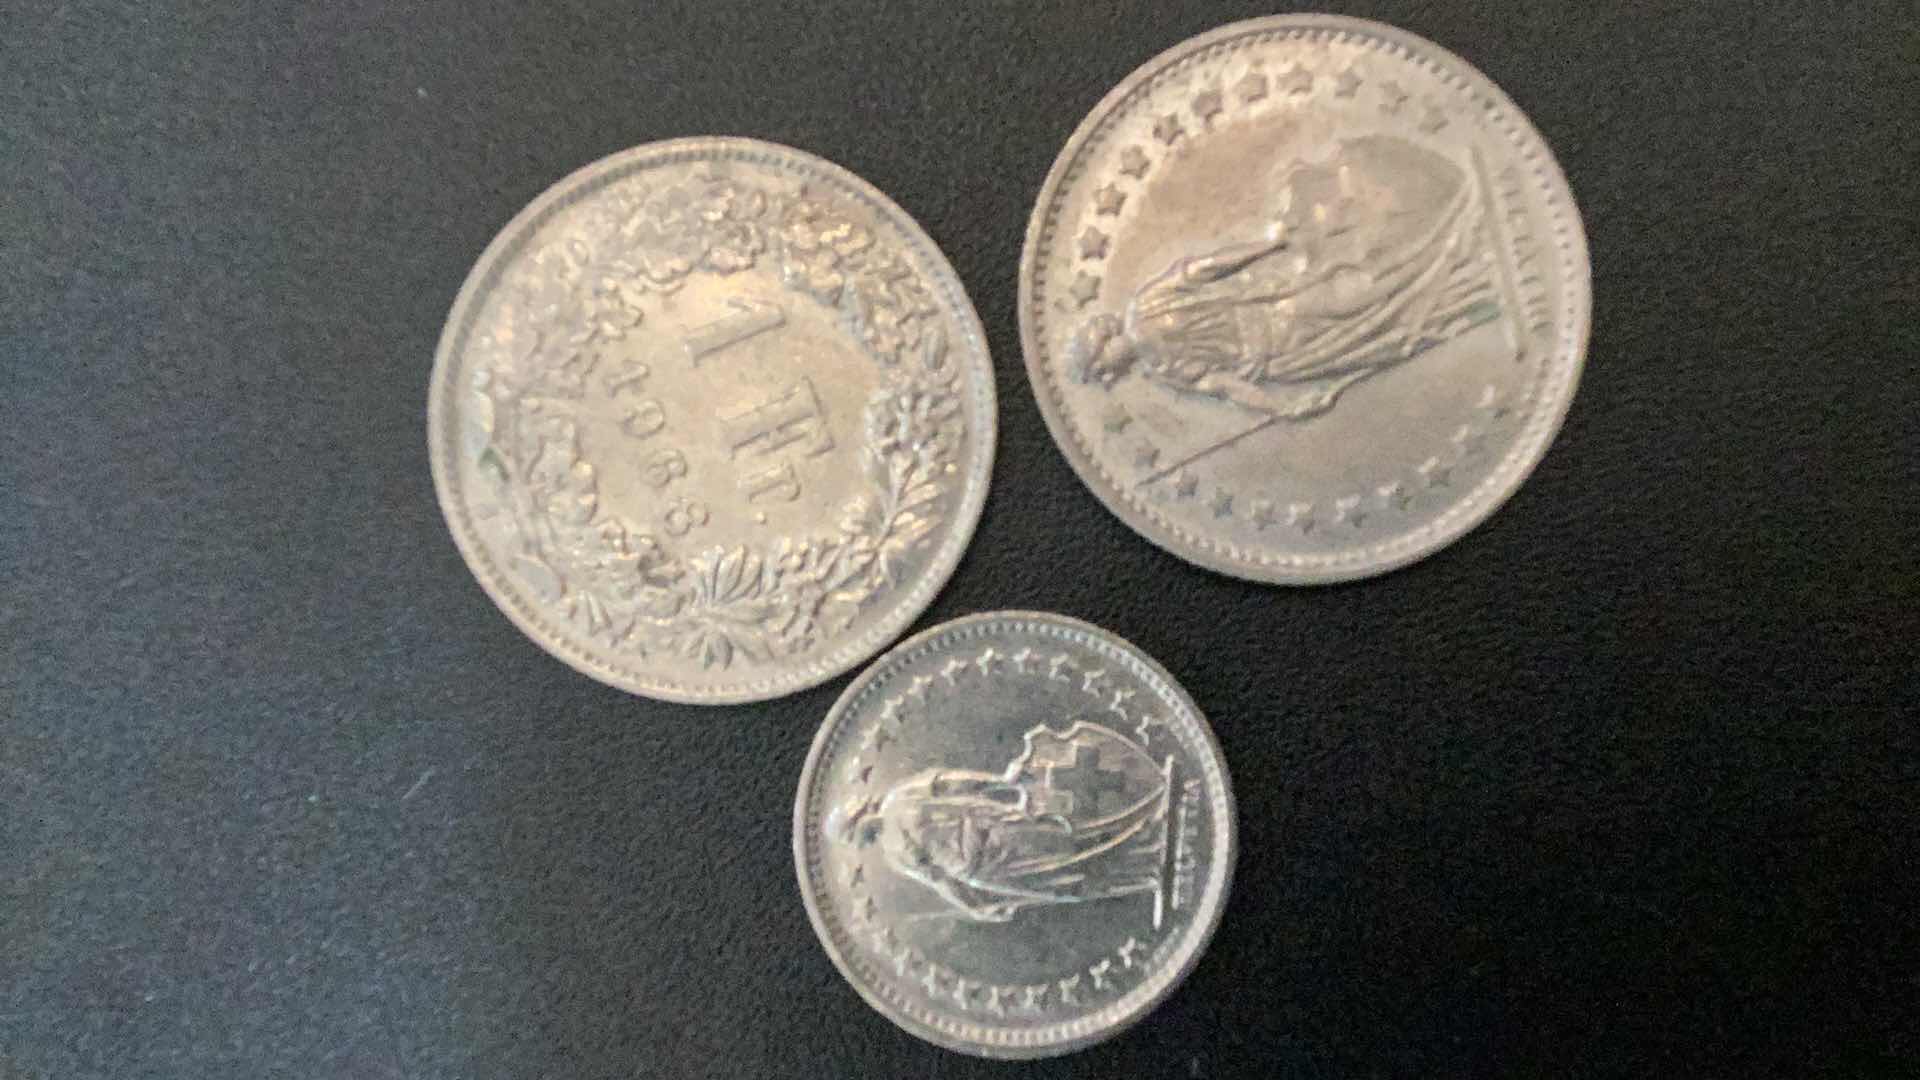 Photo 2 of 3 COLLECTIBLE COINS - SWITZERLAND 1968, 1968, 1969